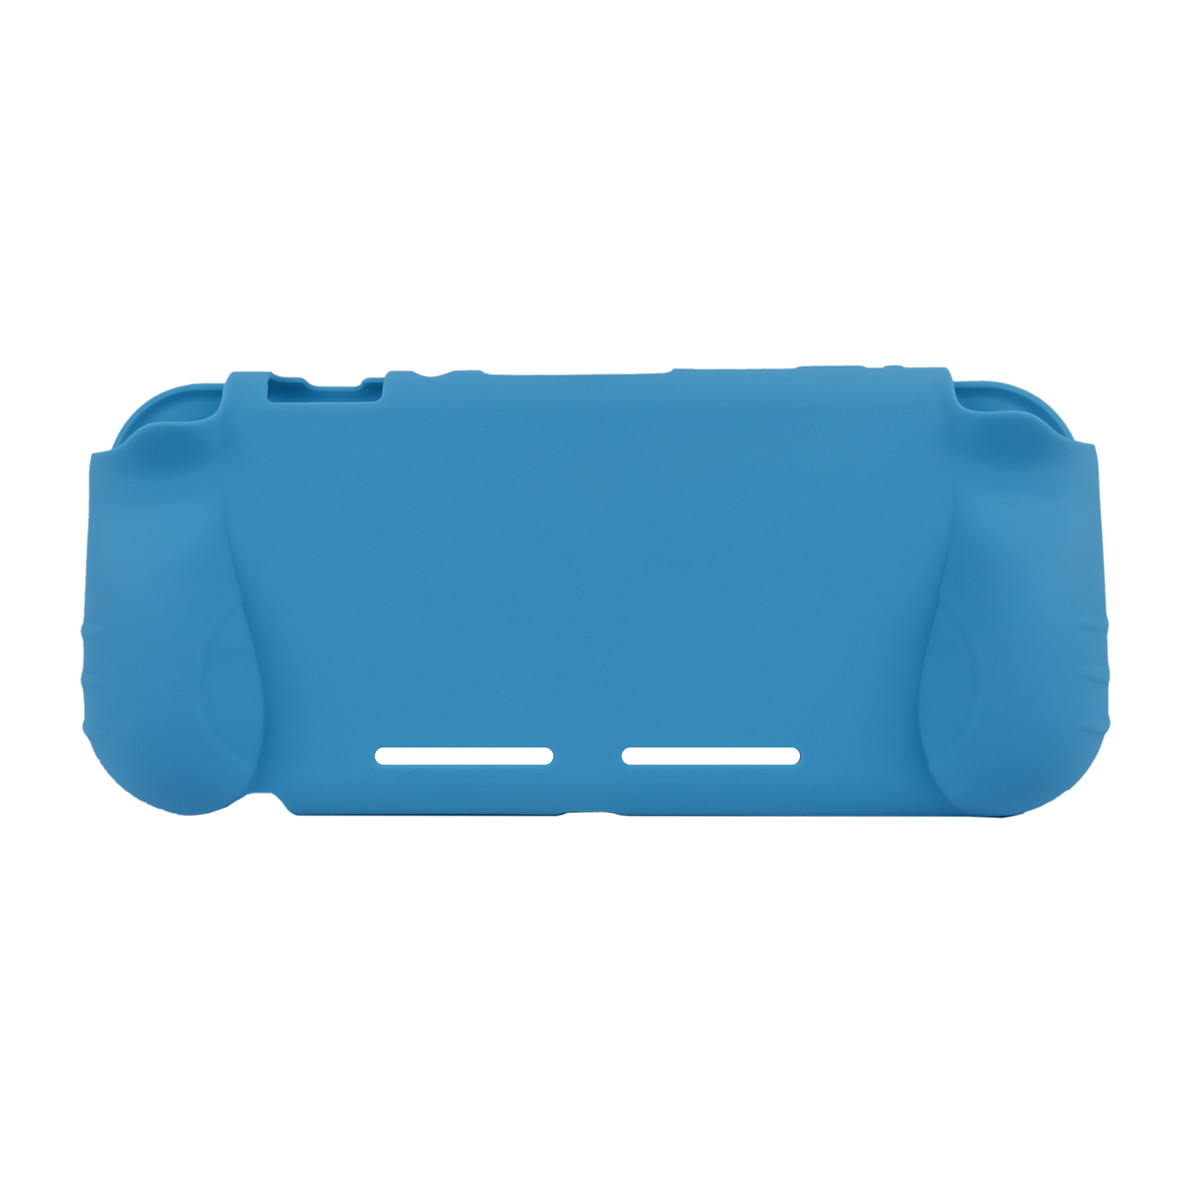 Shockproof Silicone Soft Case Protective Cover for Nintendo Switch Lite Game Console 53